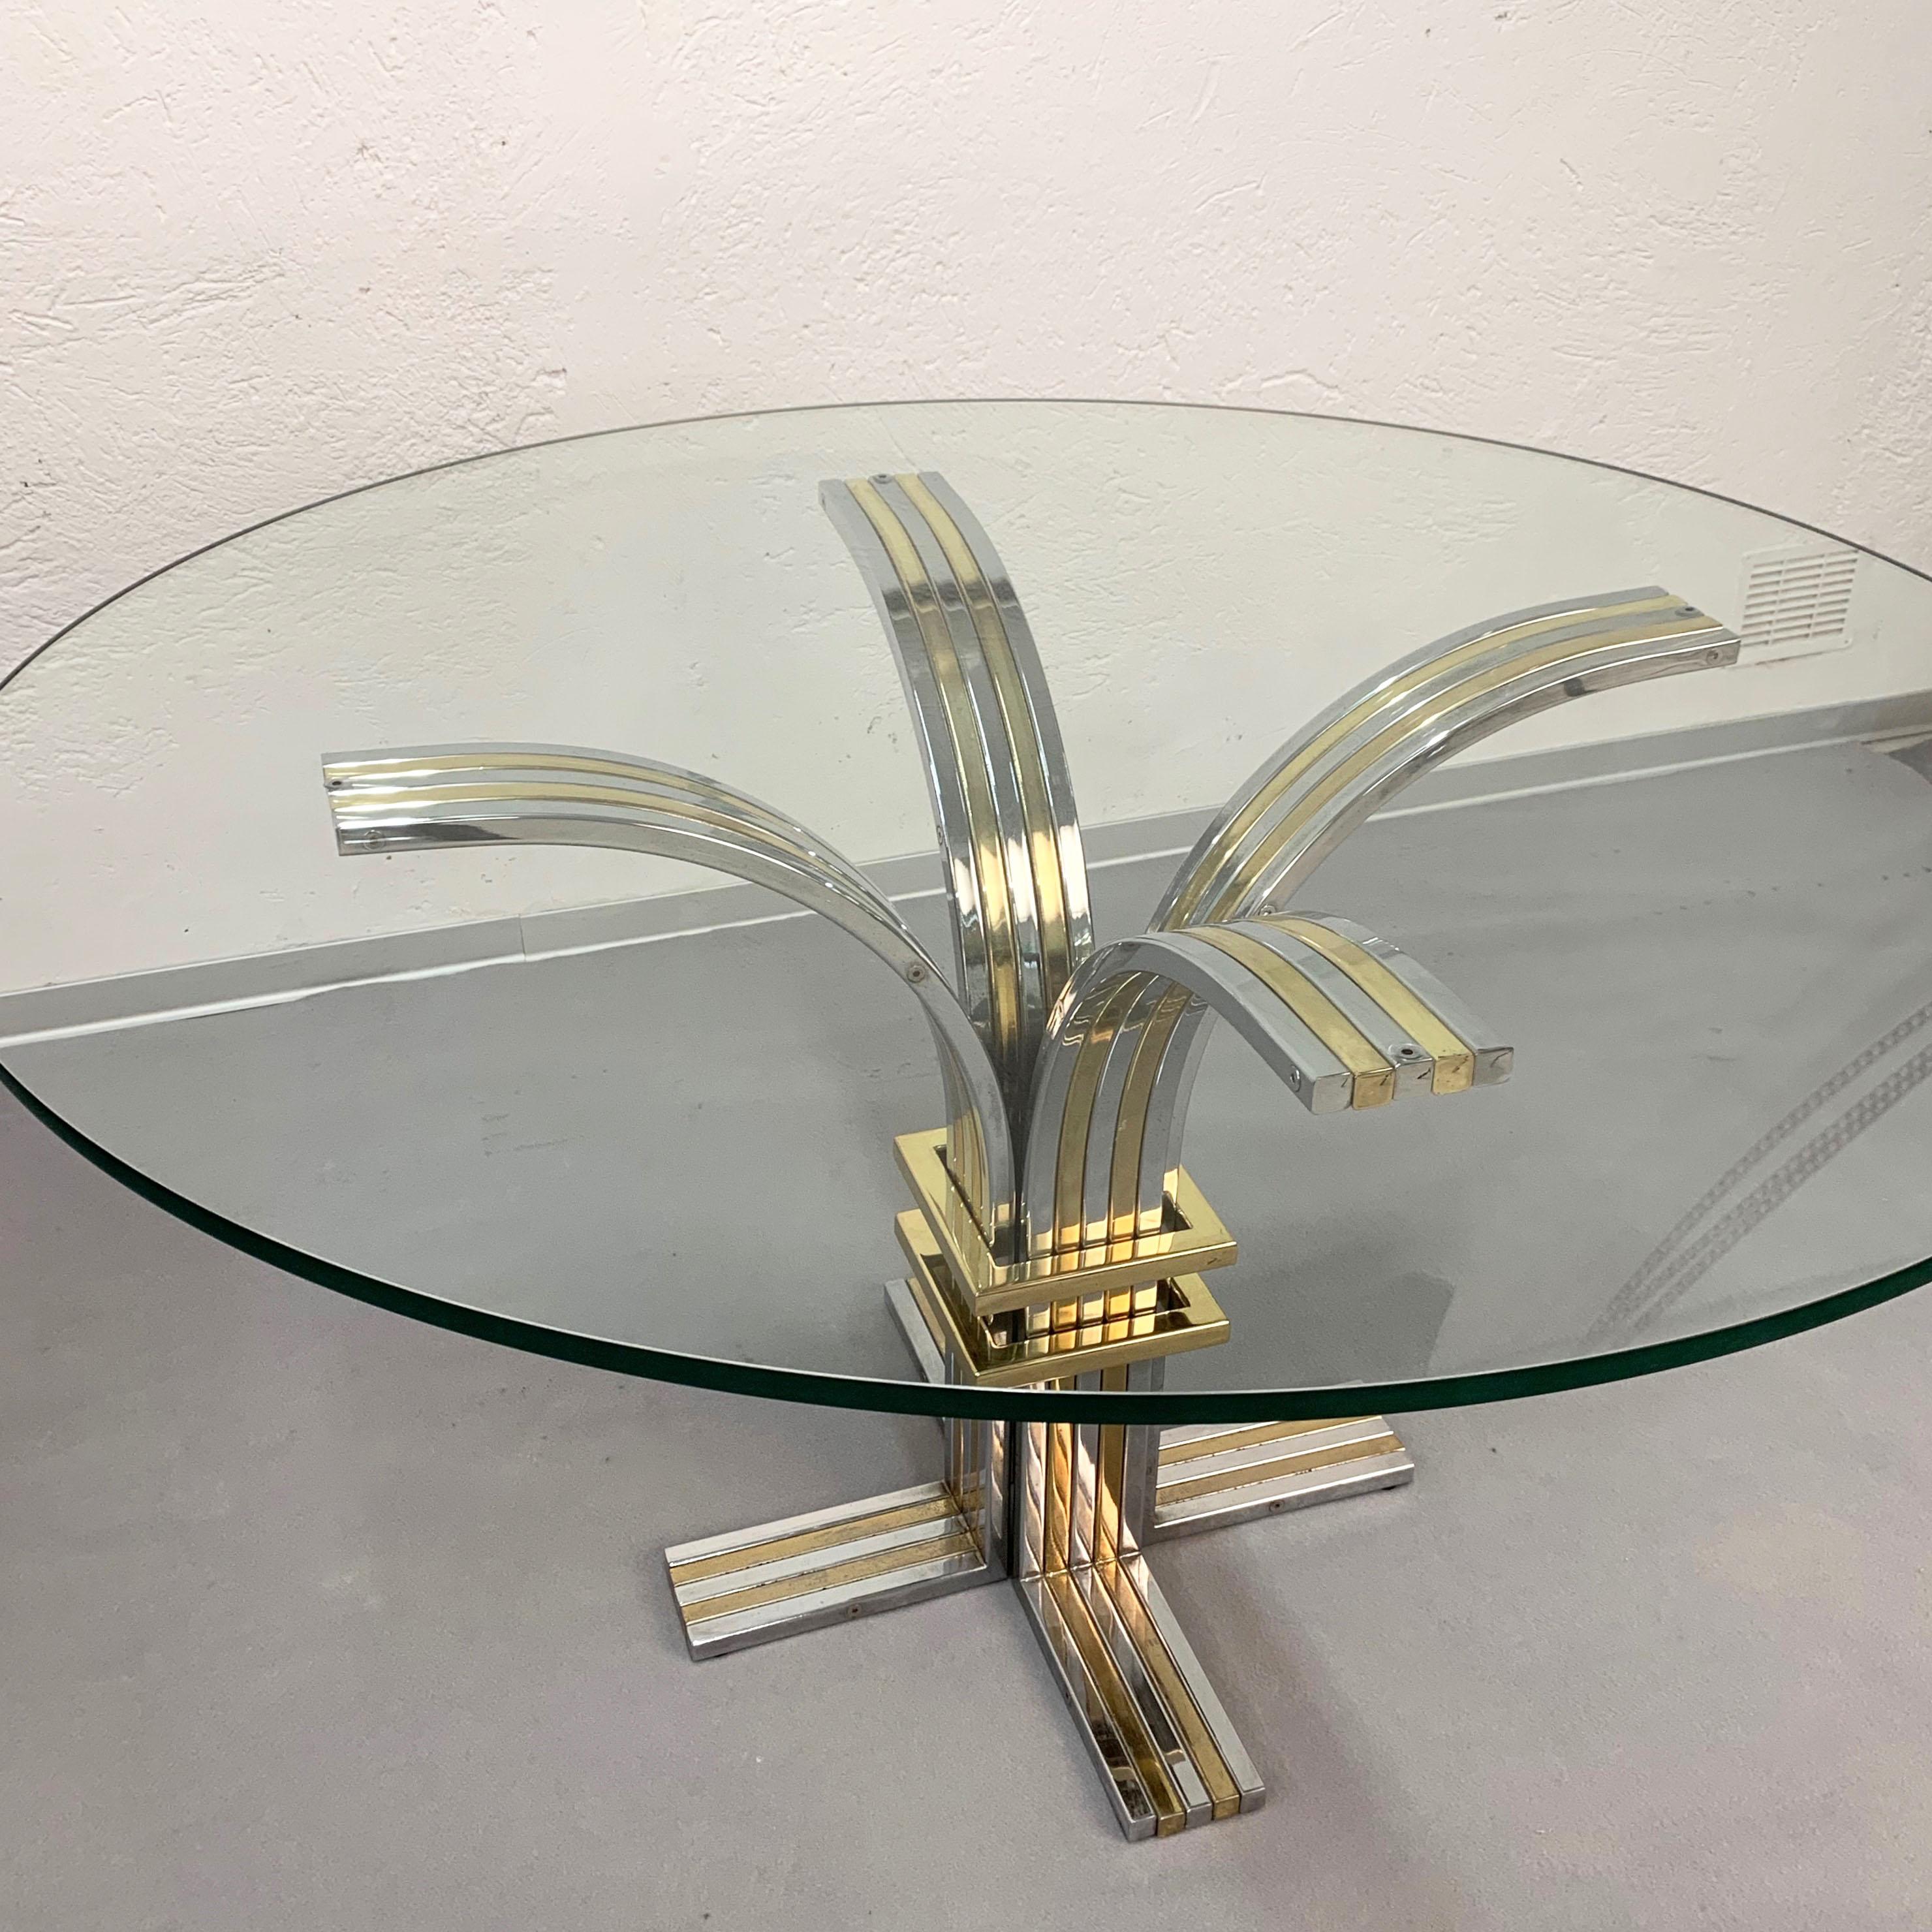 Banci & Firenze dining table in gilded brass and chrome steel.
The top is very thick 15 mm. Italian design from the 1970s - Excellent vintage condition.
It measures 130 cm in diameter.
We have extraordinary Romeo Rega style chairs that can be